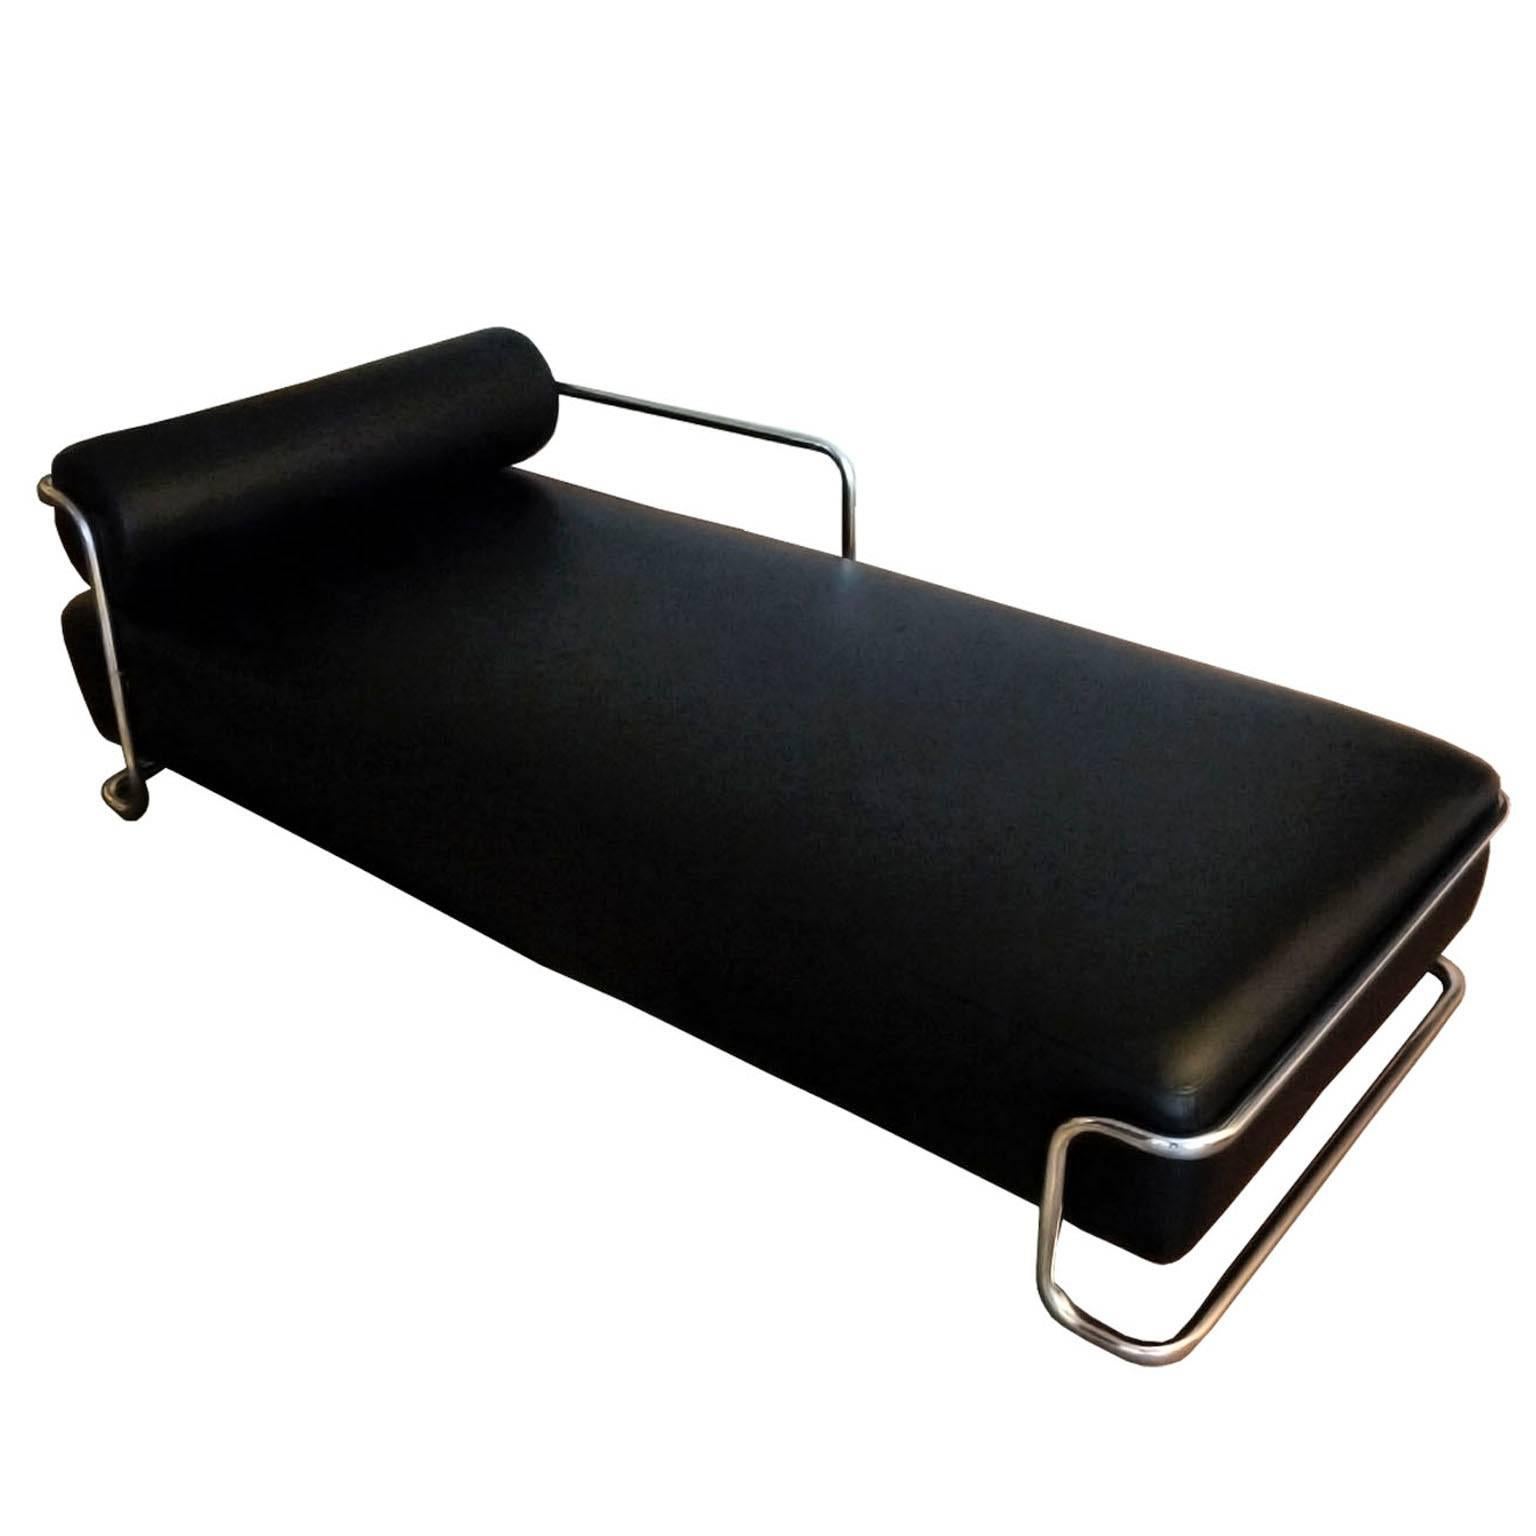 Steel frame lounge chair, France, circa 1932.

Very rare example of a modernist tubular steel chaise longue.
Edited by Thonet, attributed to Emile Guillot (architect).
Wooden frame upholstered with black leather.
Innerspring renewed.
Chromed